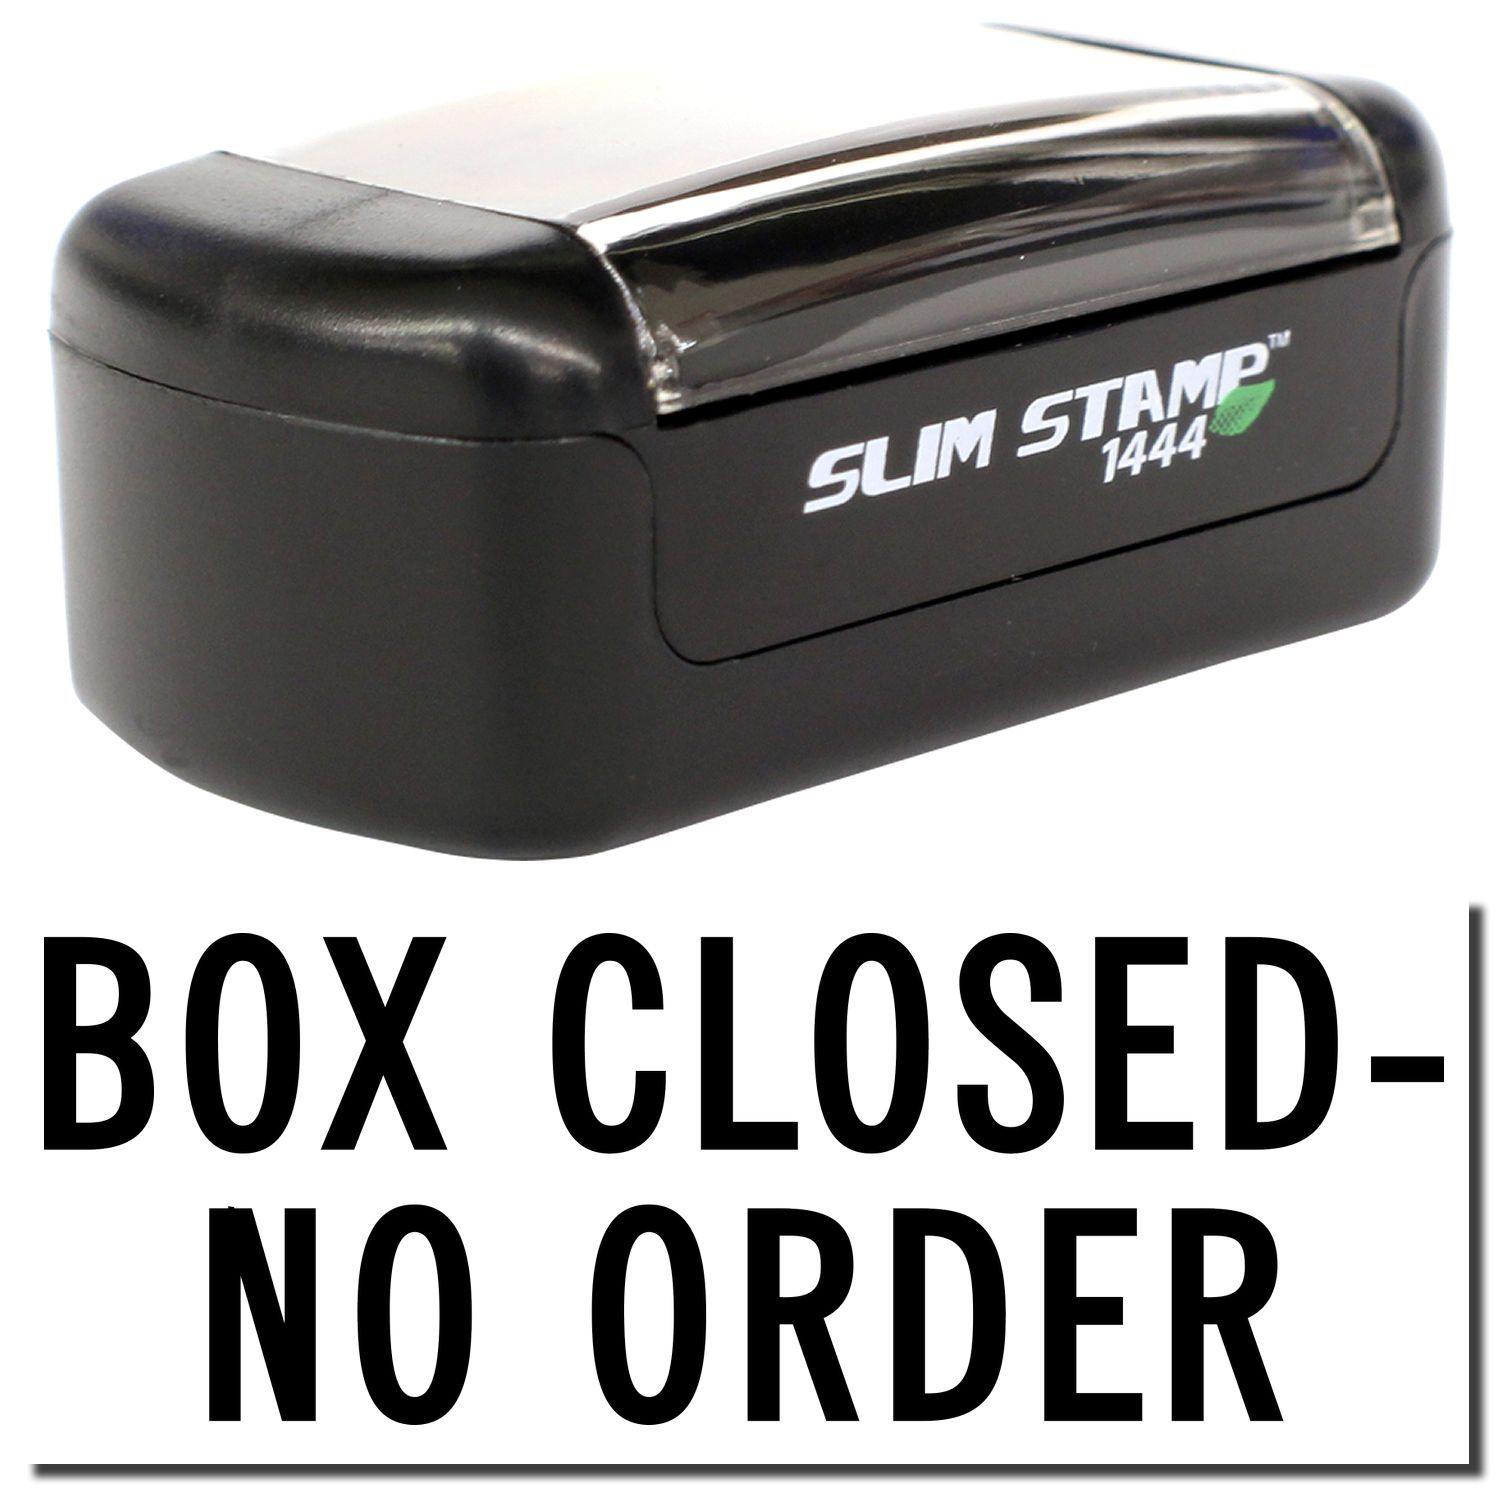 A stock office pre-inked stamp with a stamped image showing how the text "BOX CLOSED - NO ORDER" is displayed after stamping.